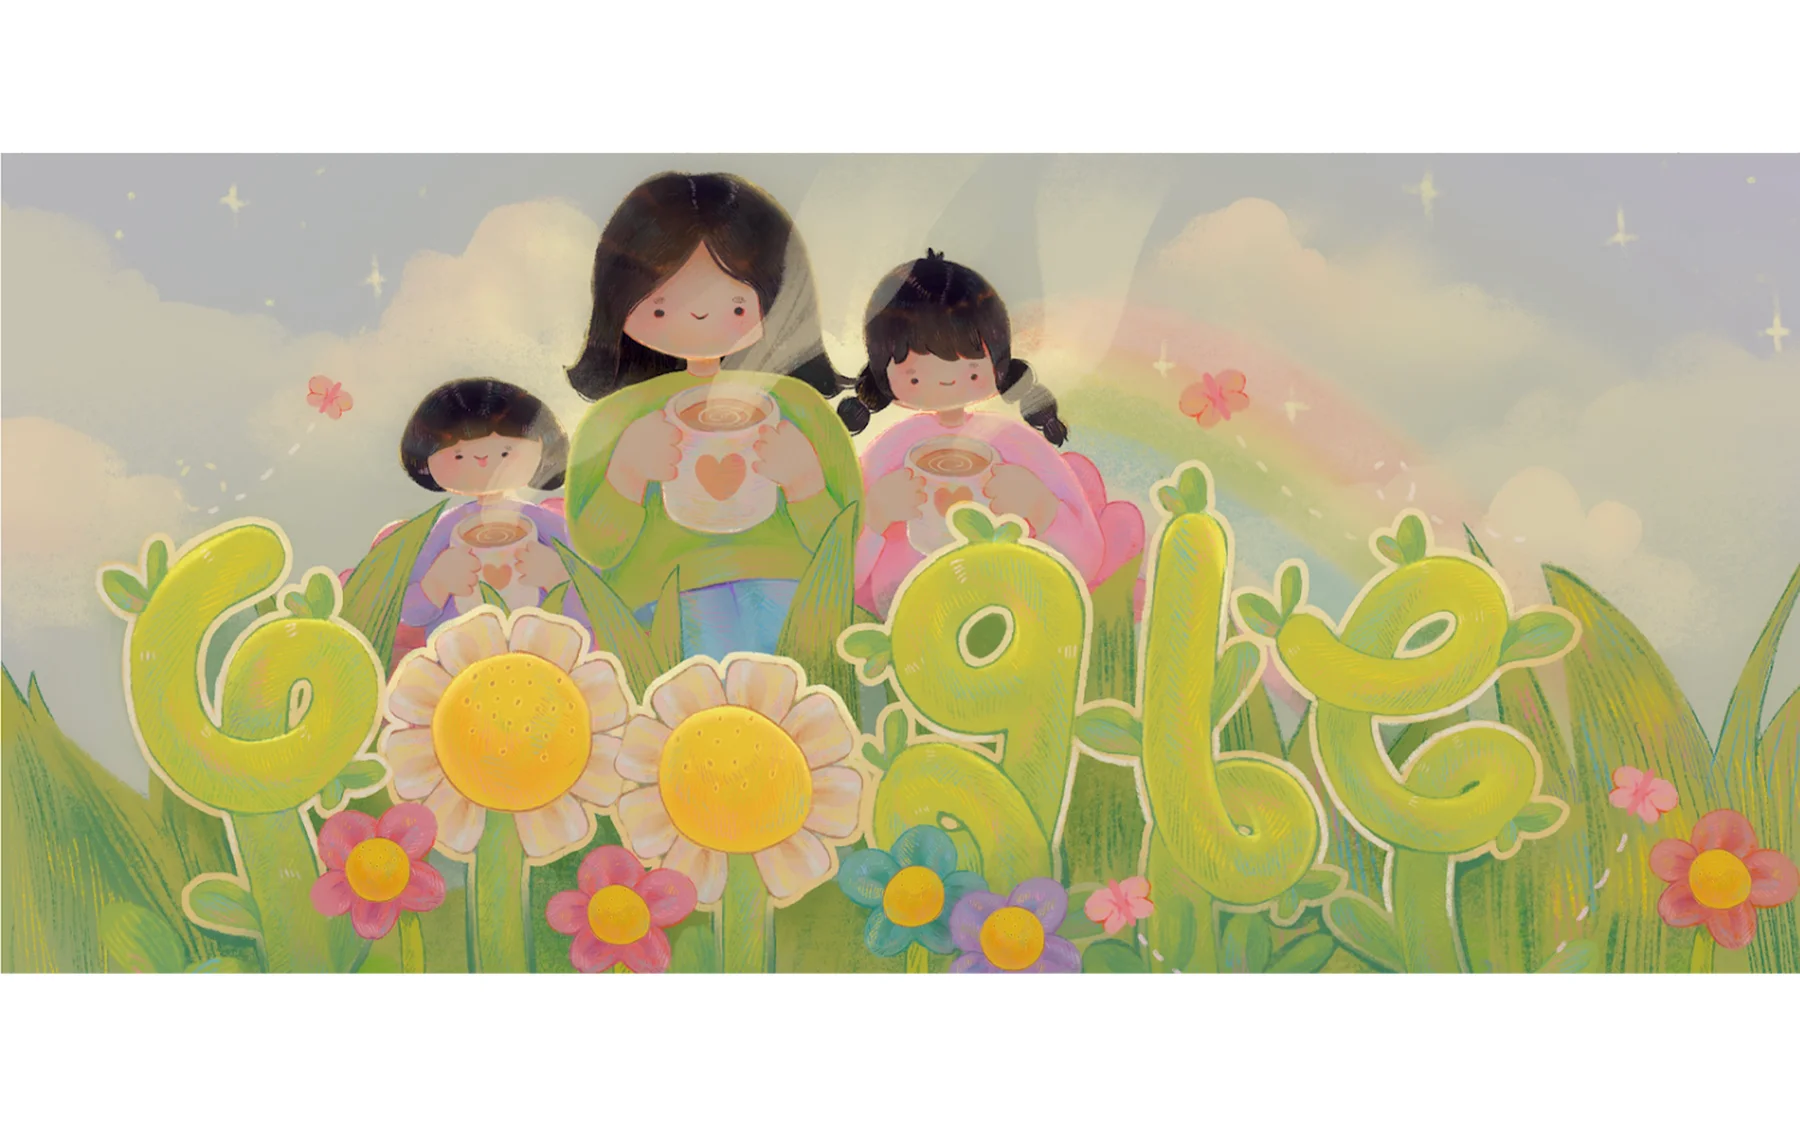 Illustration of the GOOGLE logo in a field of grass with three women standing above holding mugs of tea. The GOOGLE letters are comprised of twisting green plant stalks and flowers. The women all have fair skin and black hair. The background is a blue sky, rainbow, and butterflies.